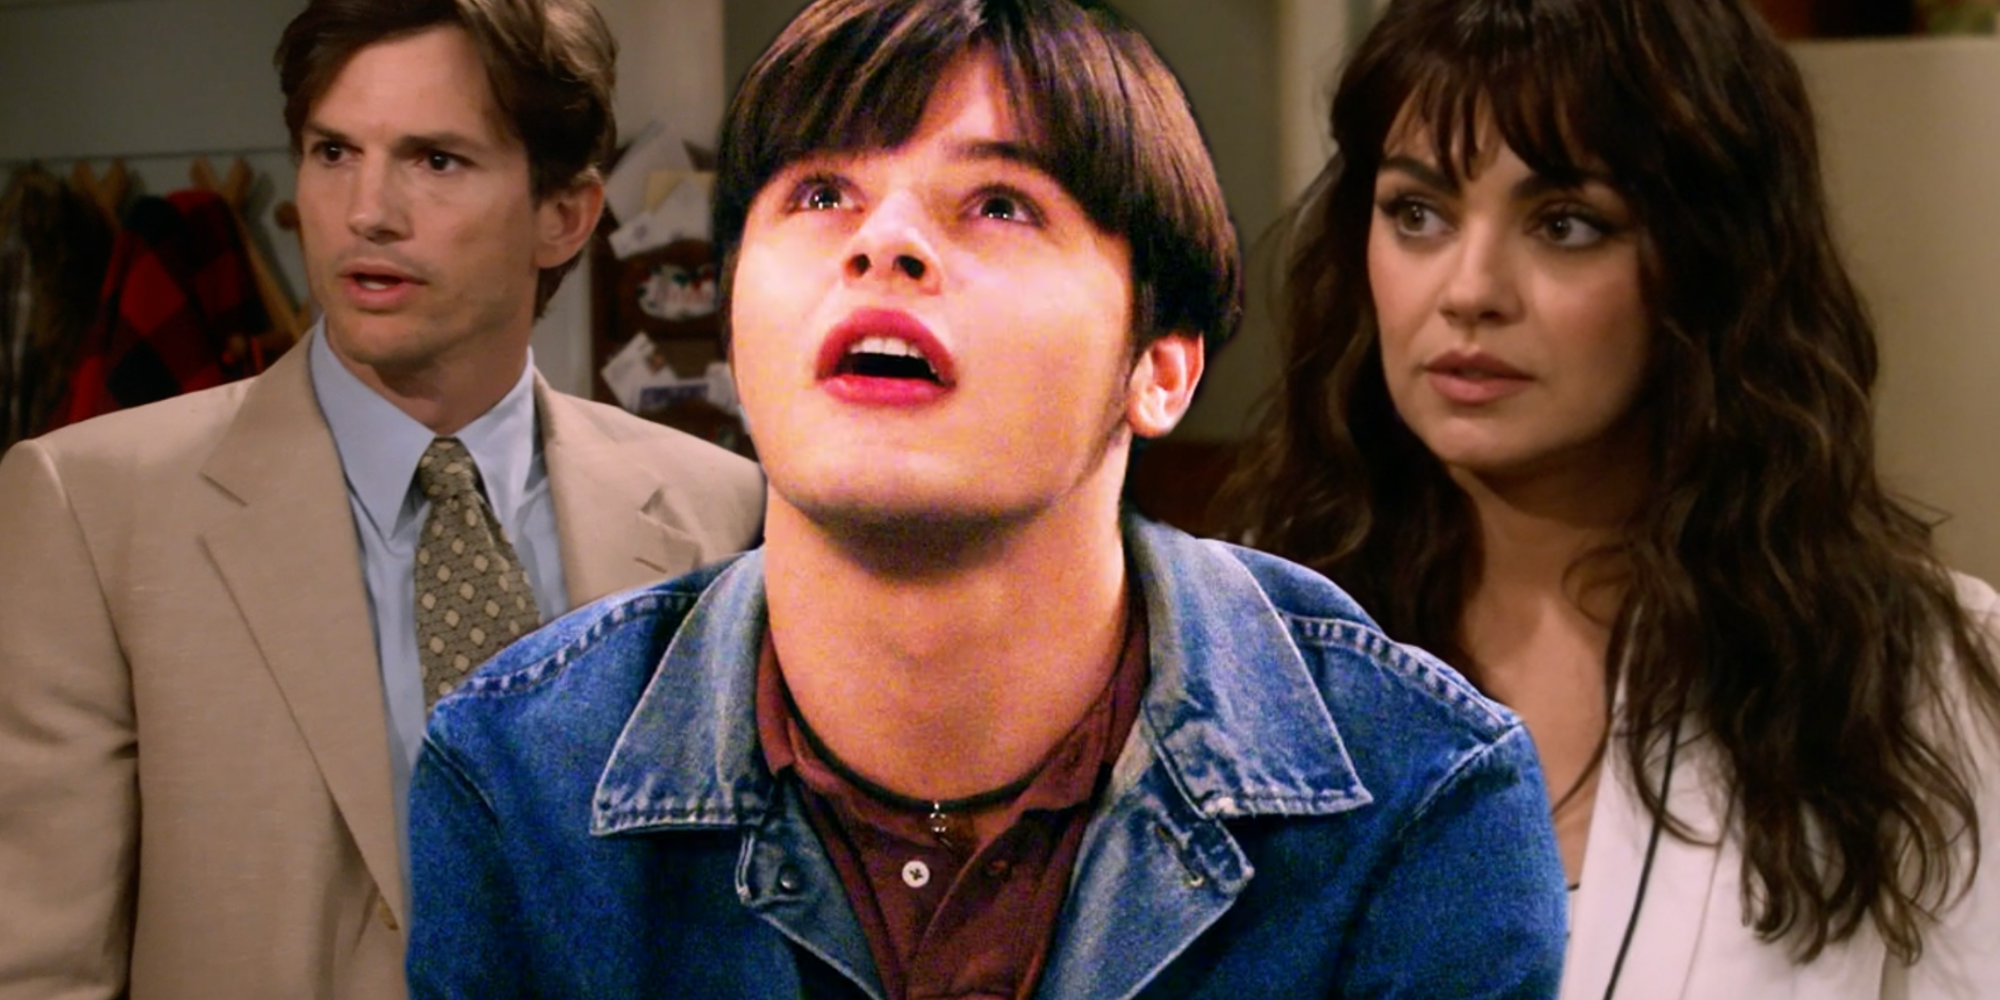 That '90s Show Season 2's Missing Original Actors Makes Complaints About 1 Character's Return After 19 Years Worse